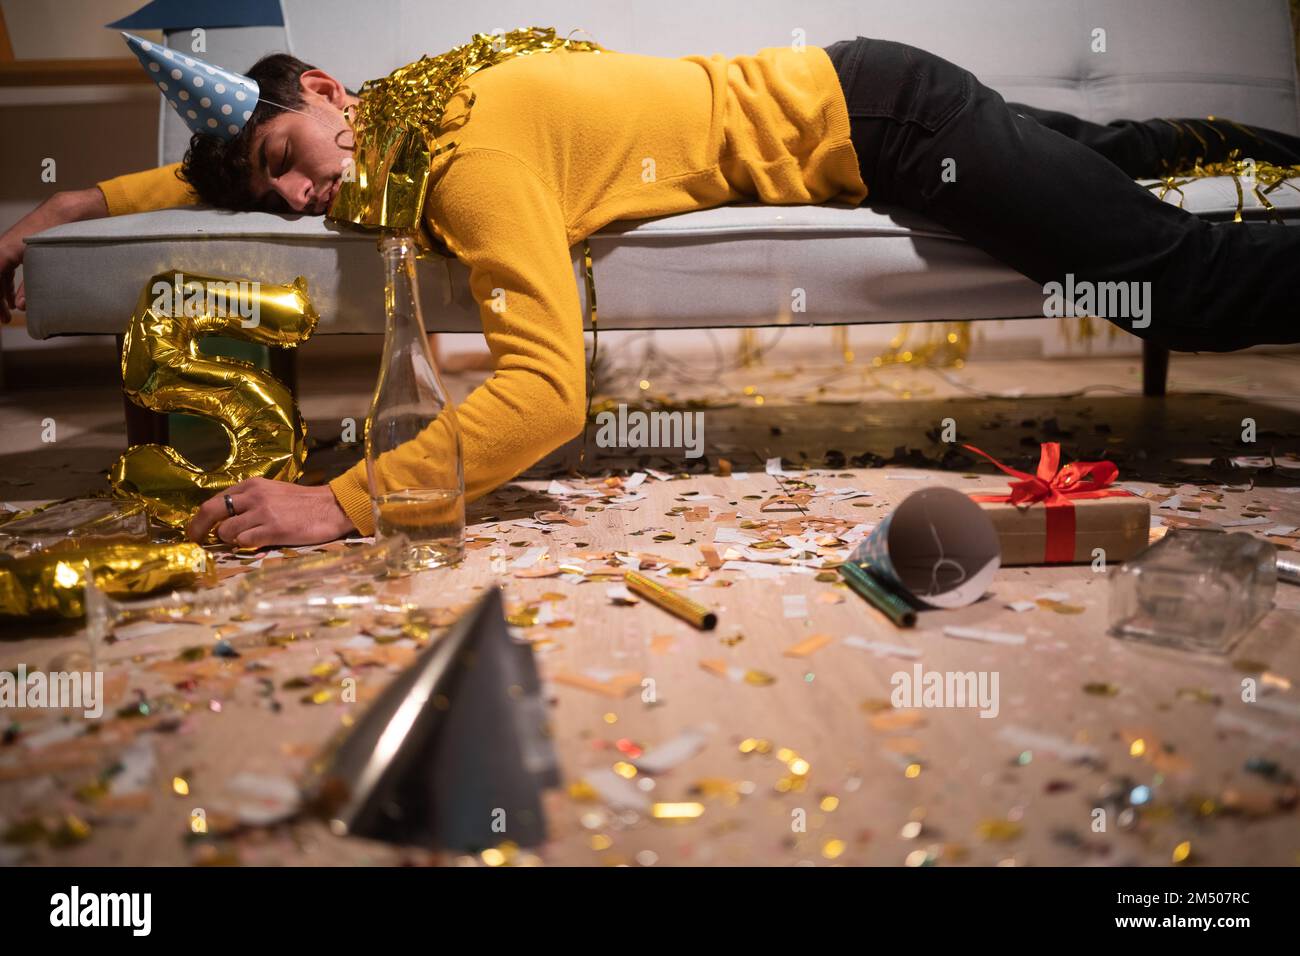 Drunk man sleep in room after birthday party. Copy space Stock Photo